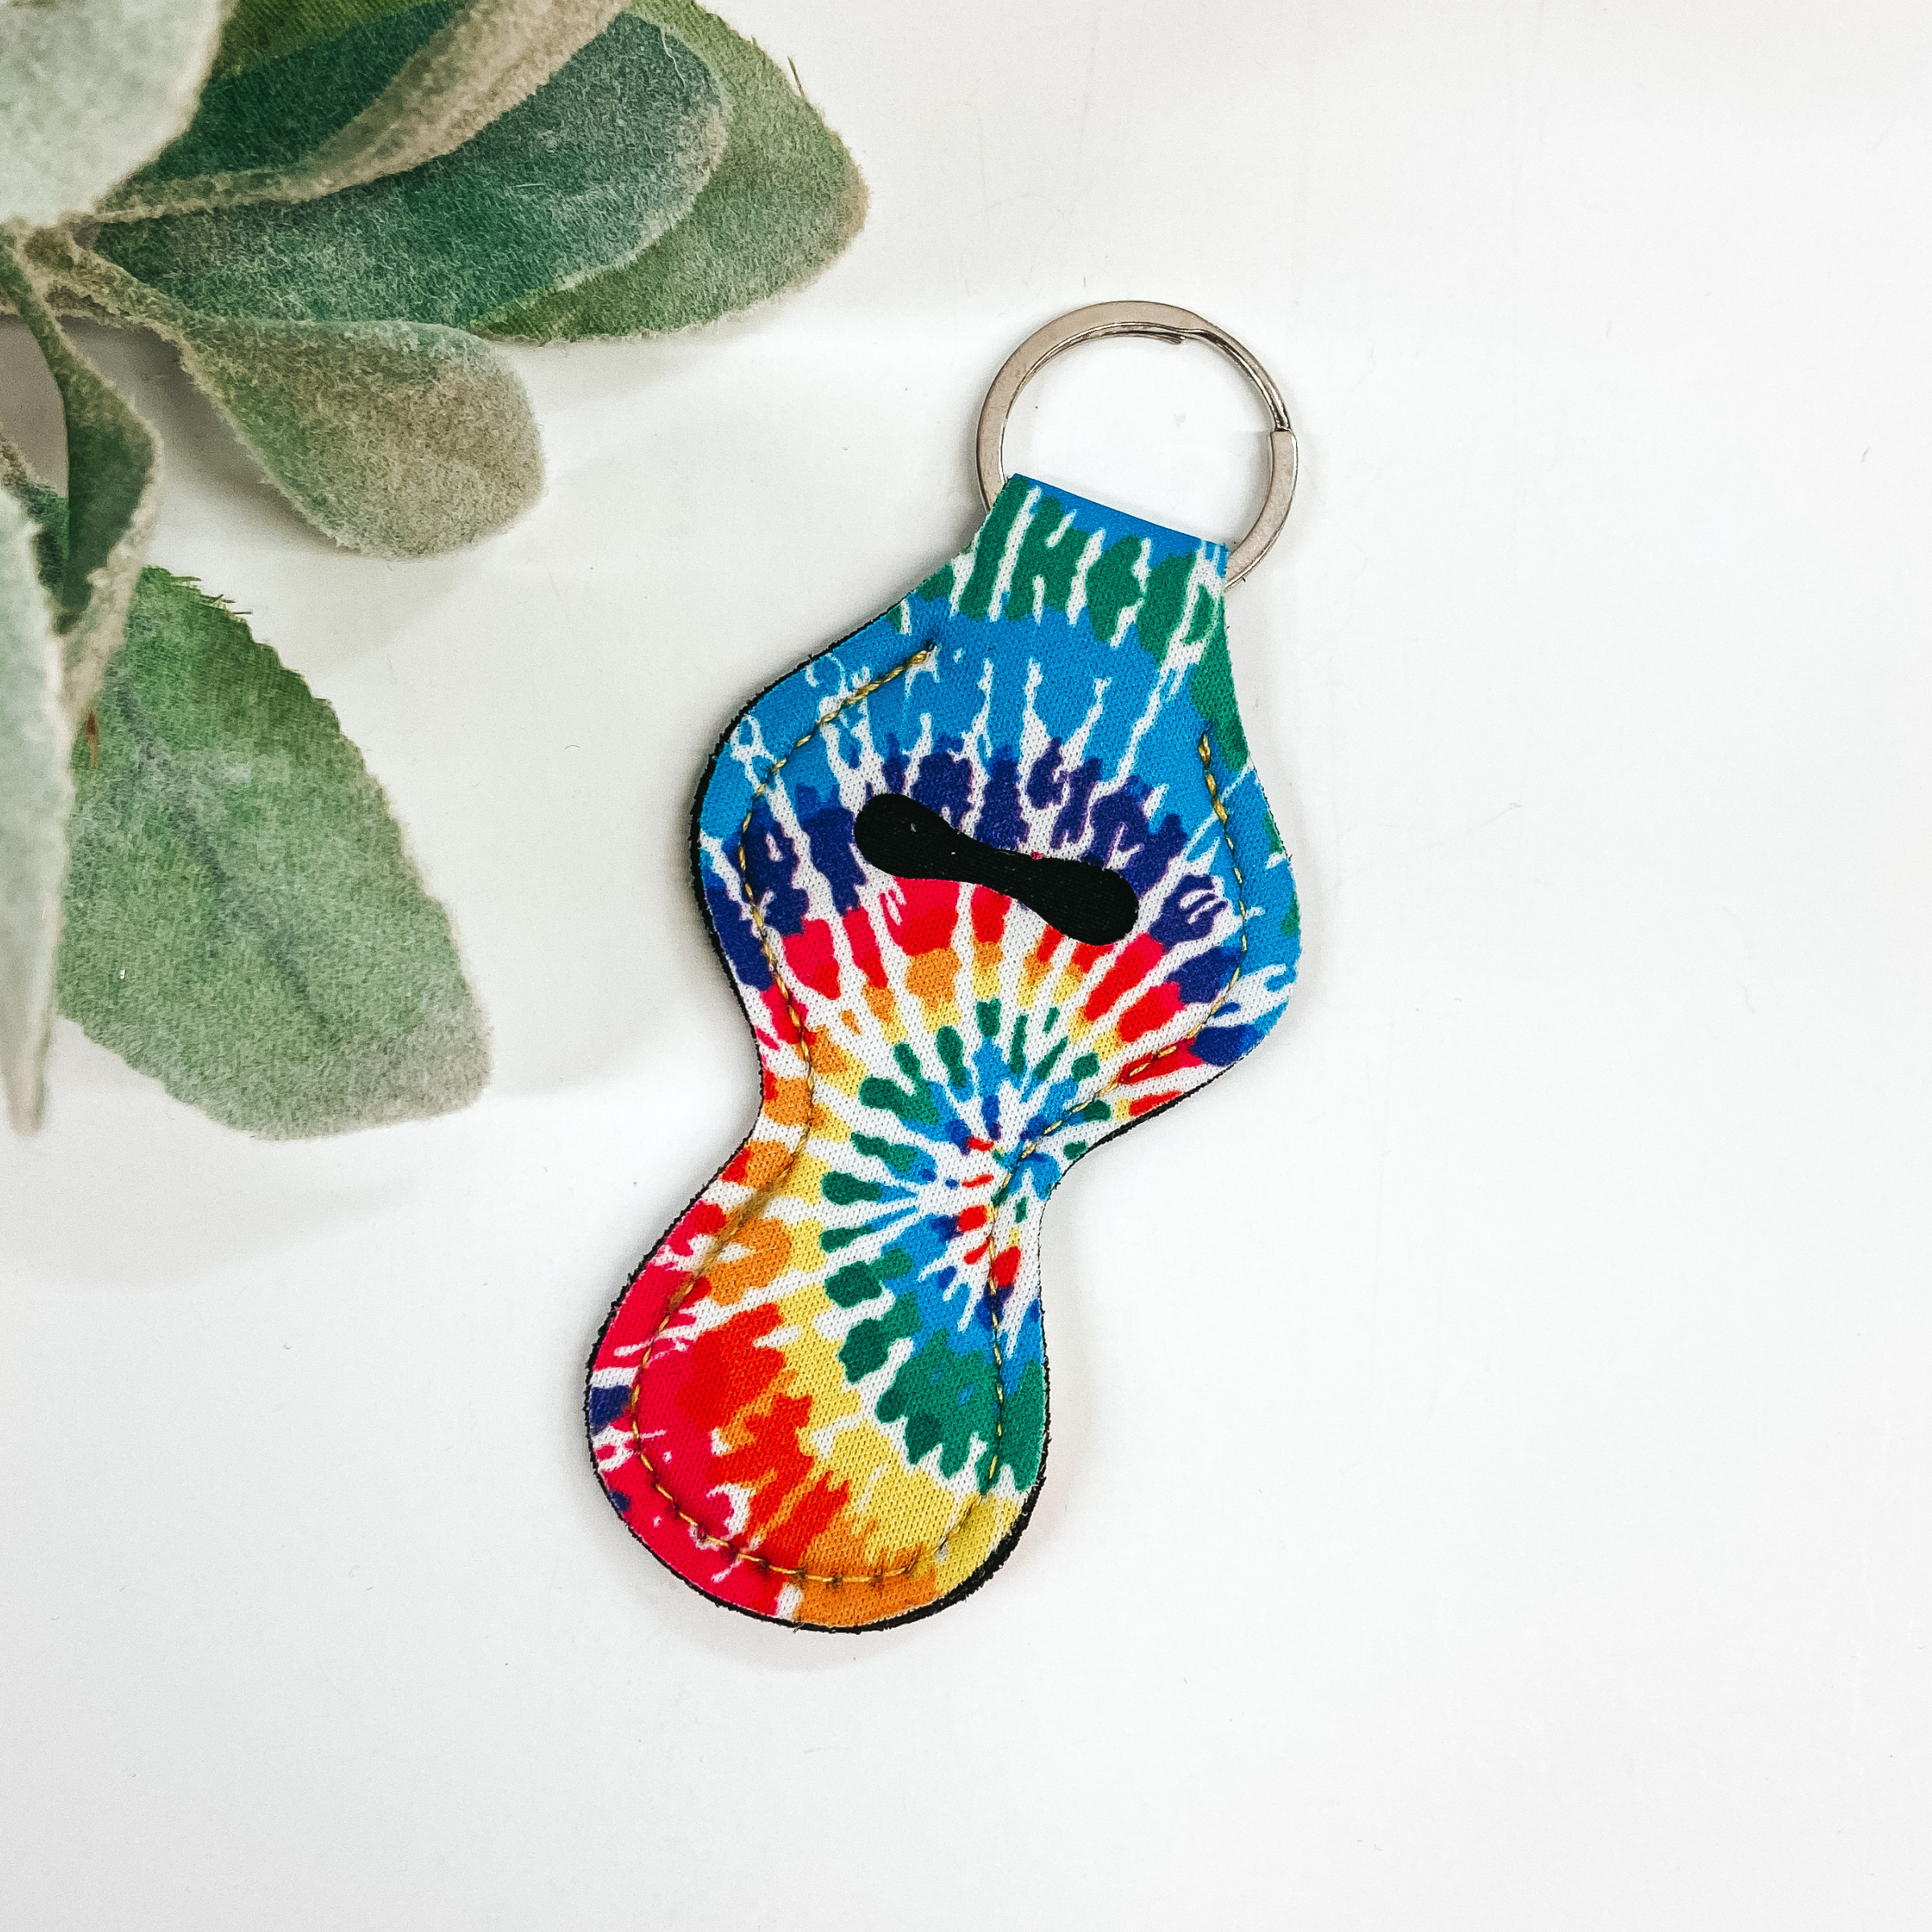 Lip Balm Holder in Tie Dye - Giddy Up Glamour Boutique